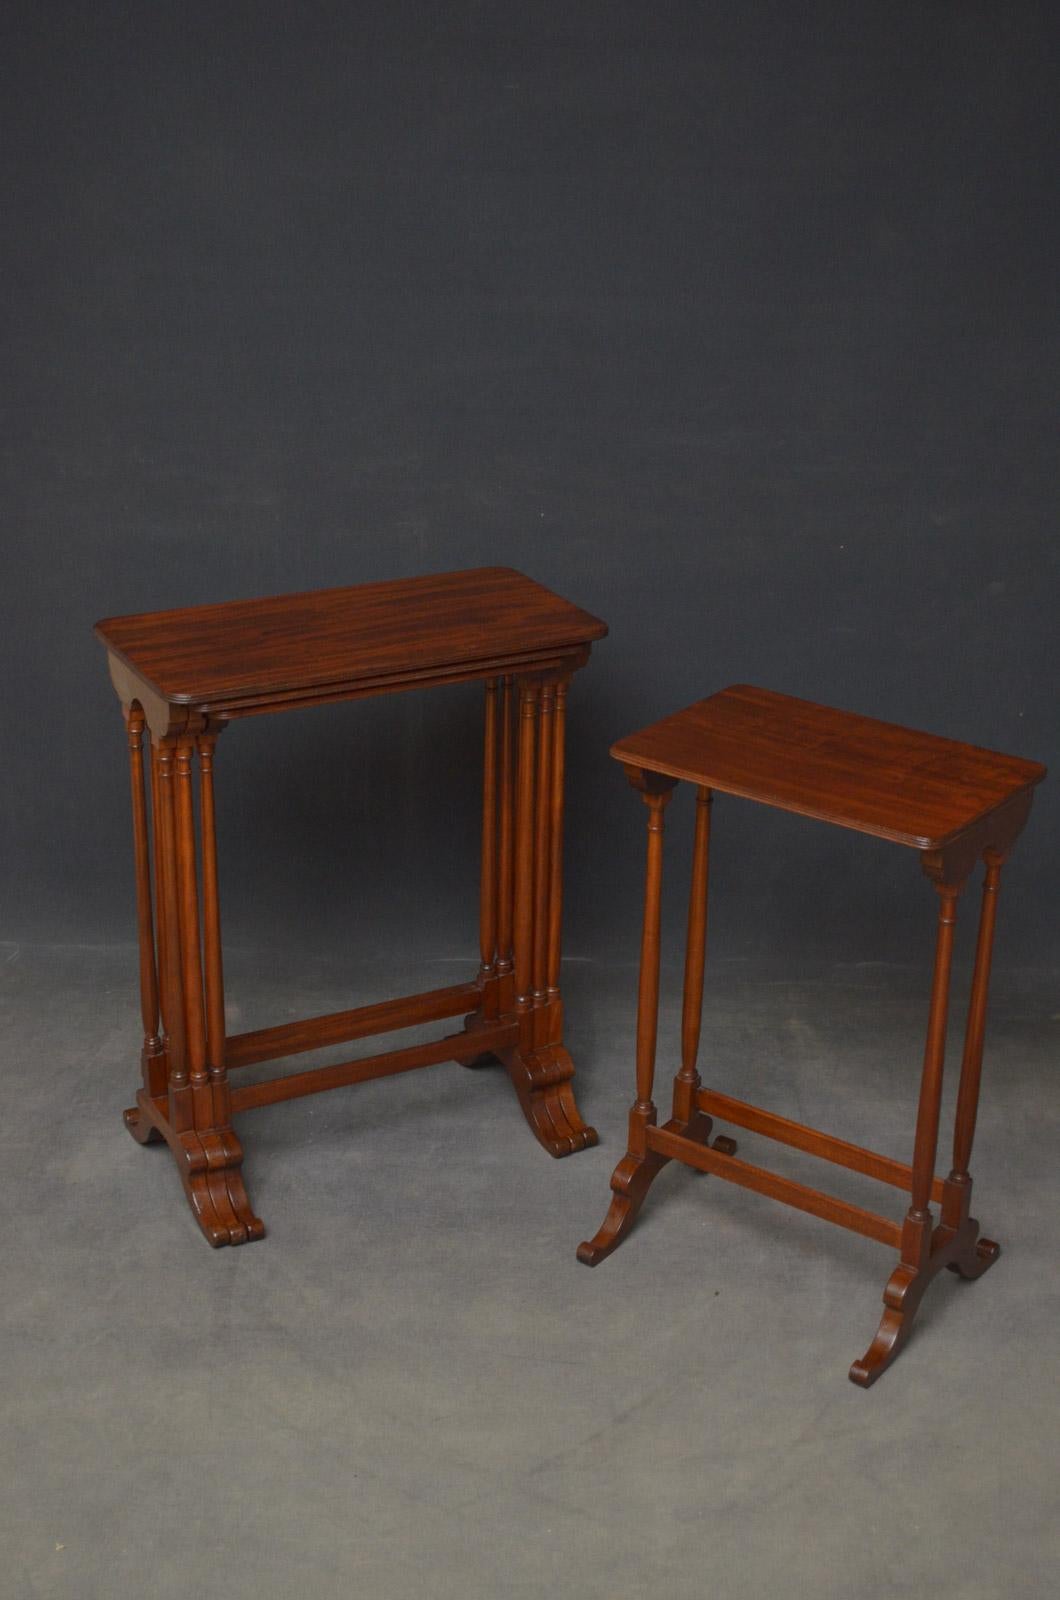 Sn2999 Fine quality figured mahogany nest of three plus one tables, each having stunning figured top with reeded edge and turned, slender legs terminating in scroll feet. This set of four tables is in home ready condition, circa 1820
H 30